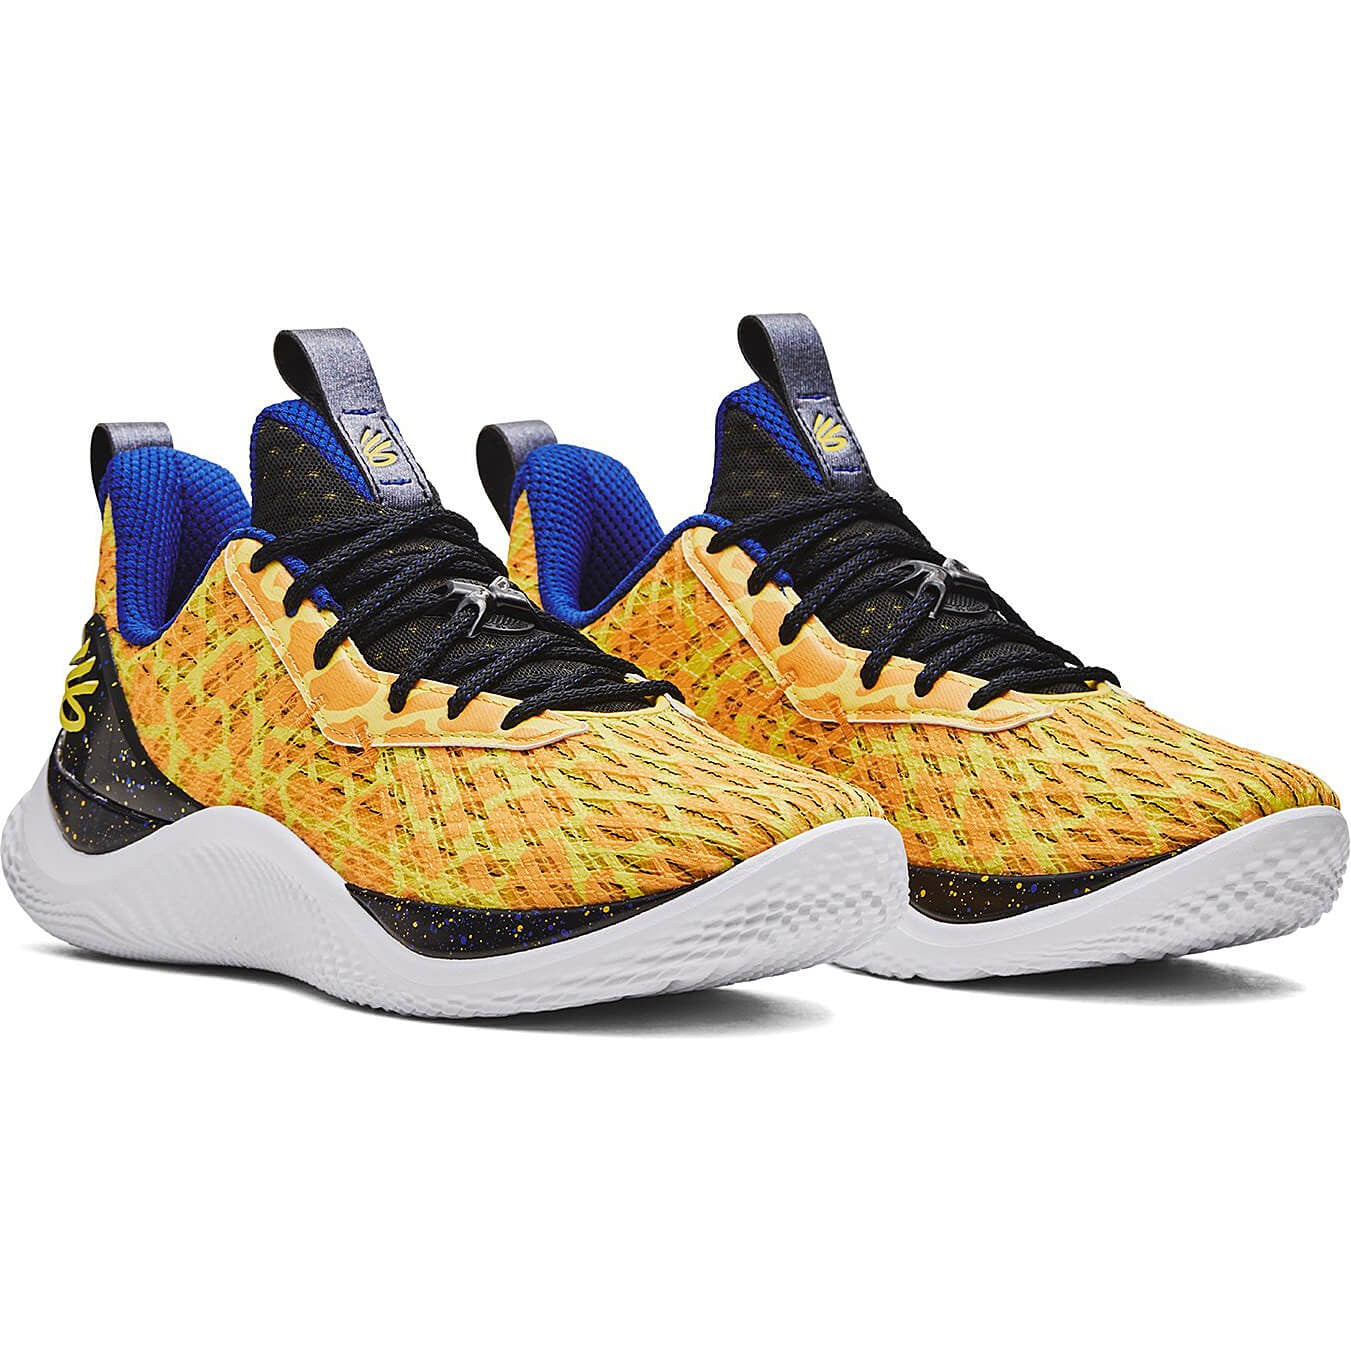 Under Armour Unisex Curry Flow 10 'Double Bang' Basketball Shoes Steeltown Gold / Black